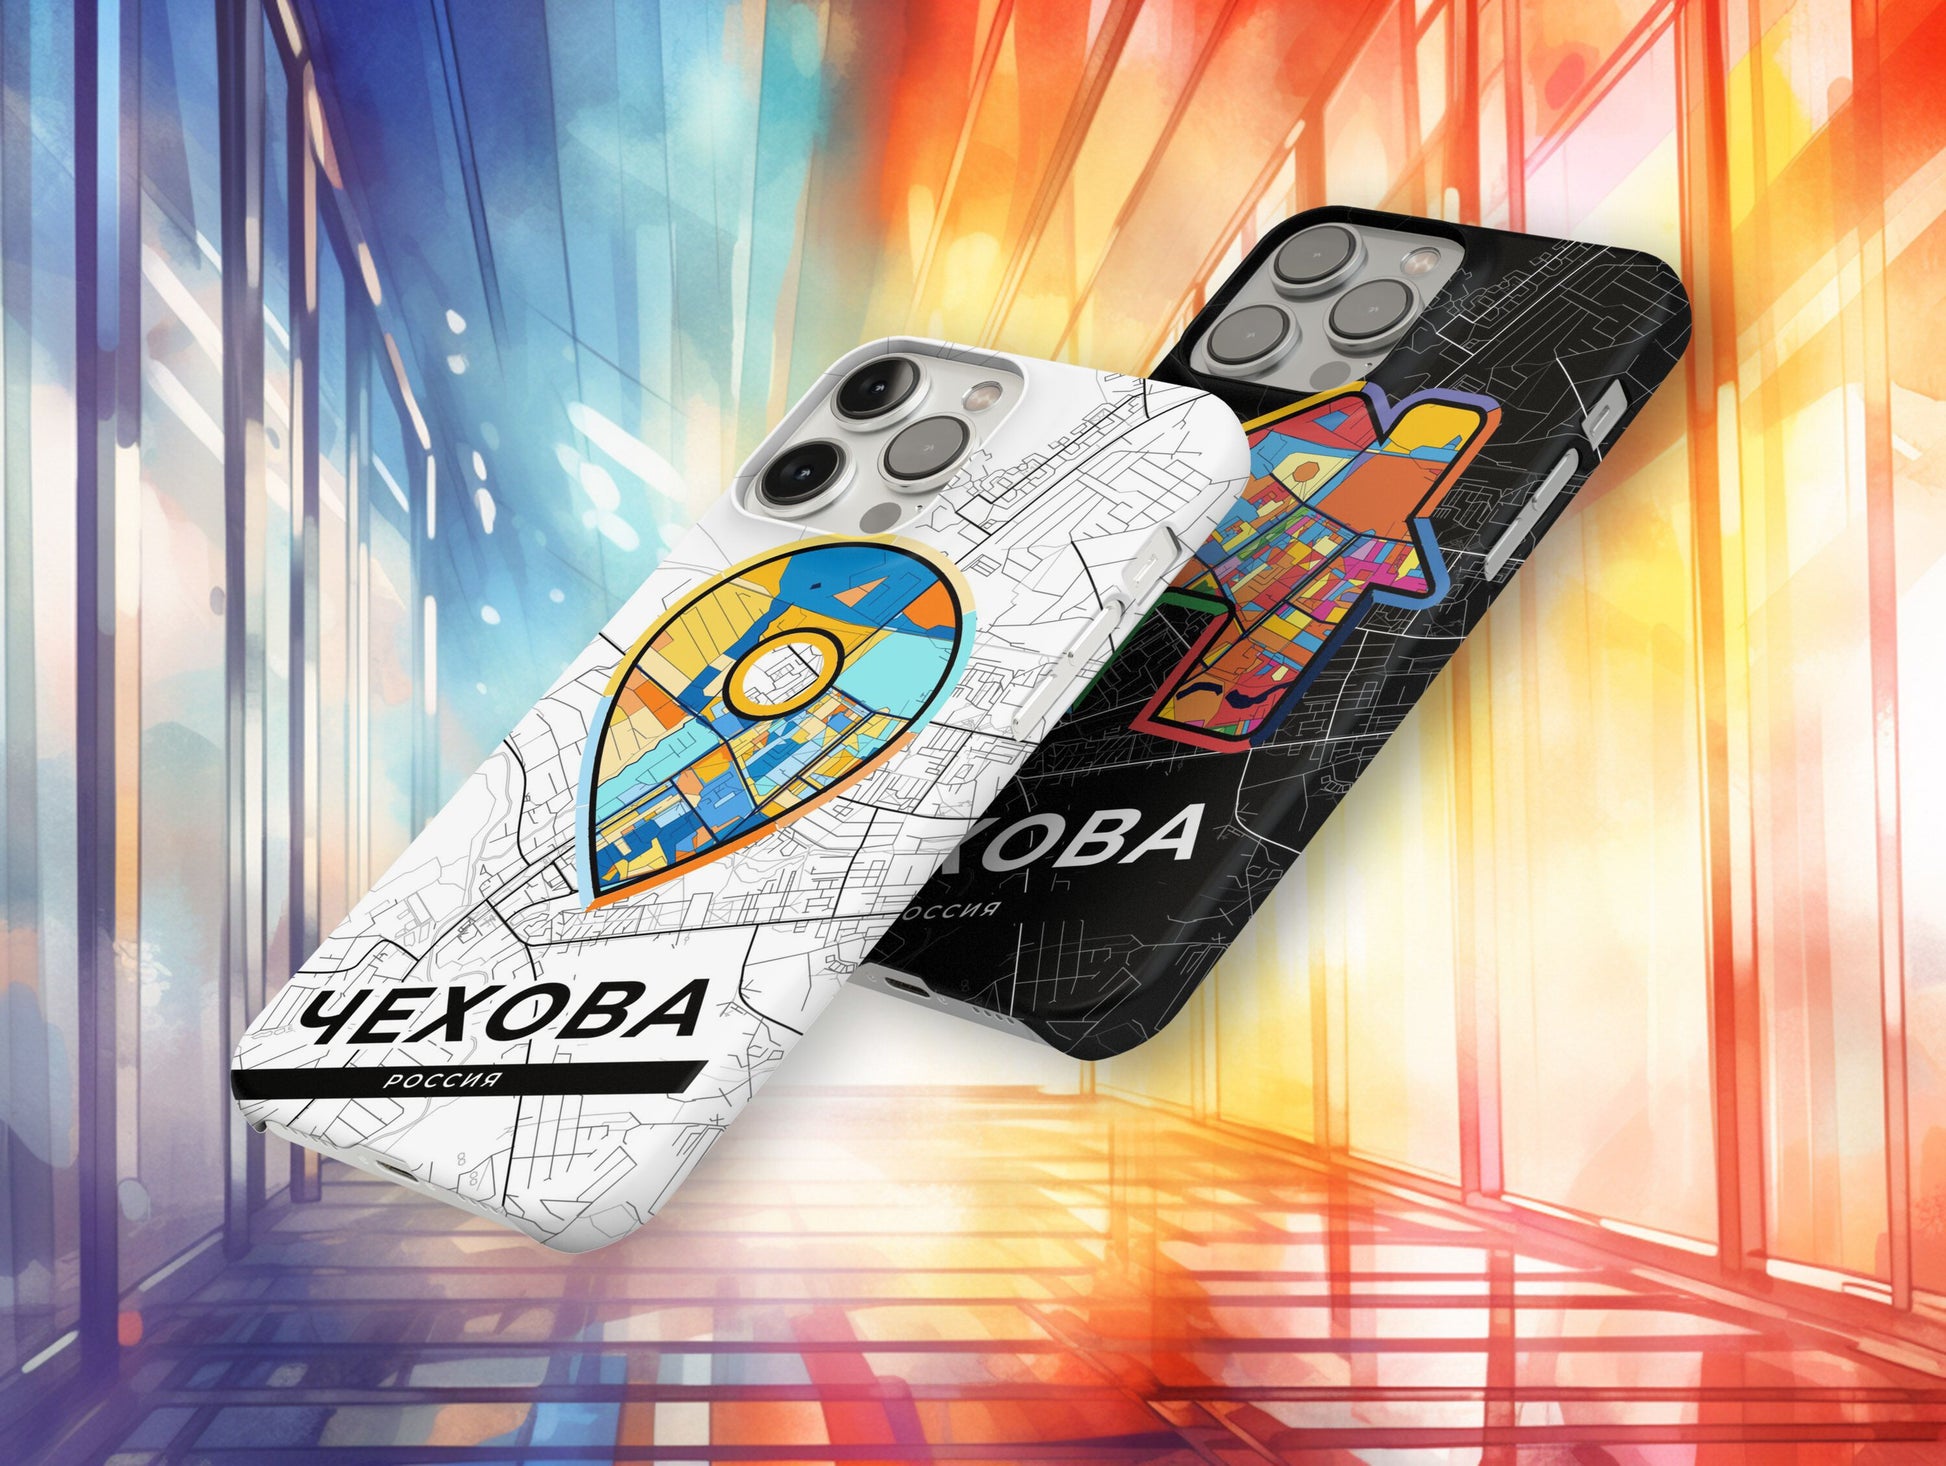 Chekhov Russia slim phone case with colorful icon. Birthday, wedding or housewarming gift. Couple match cases.